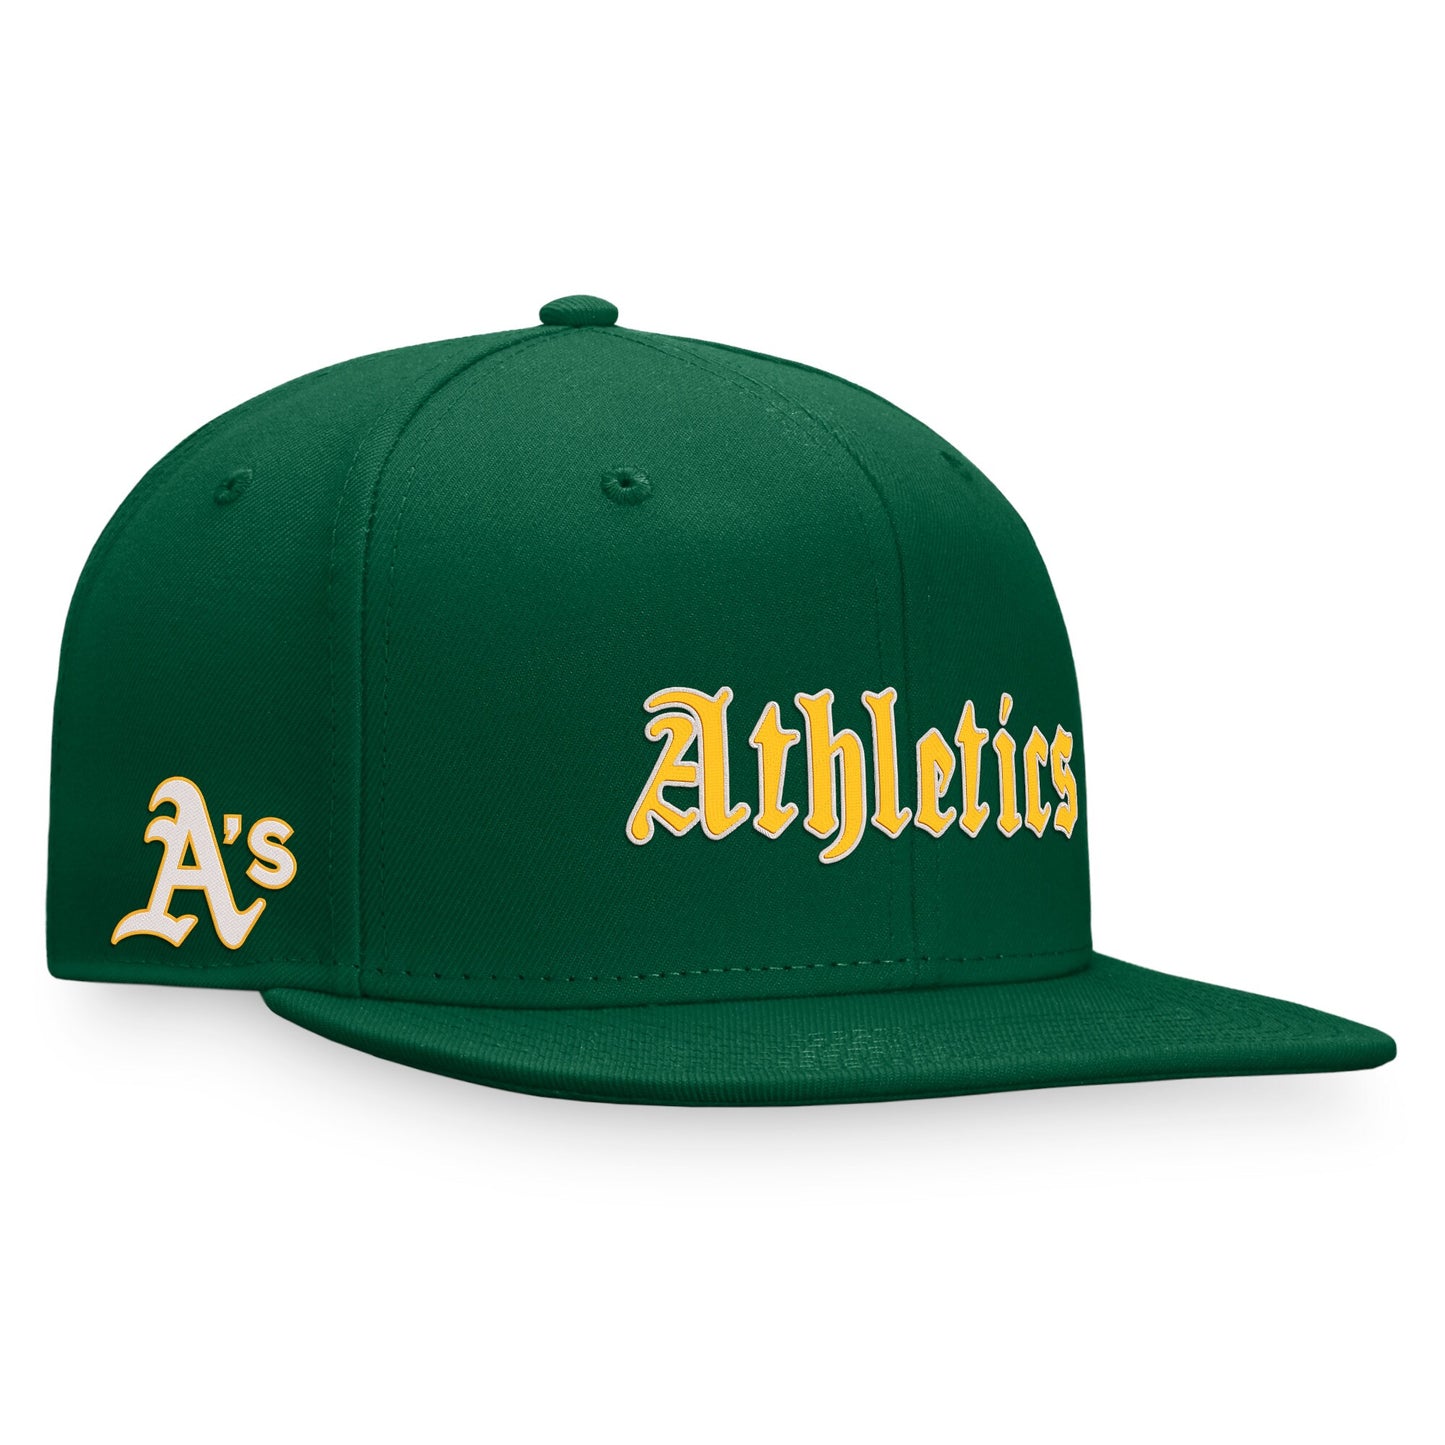 Oakland Athletics Fanatics Branded Gothic Script Fitted Hat - Green